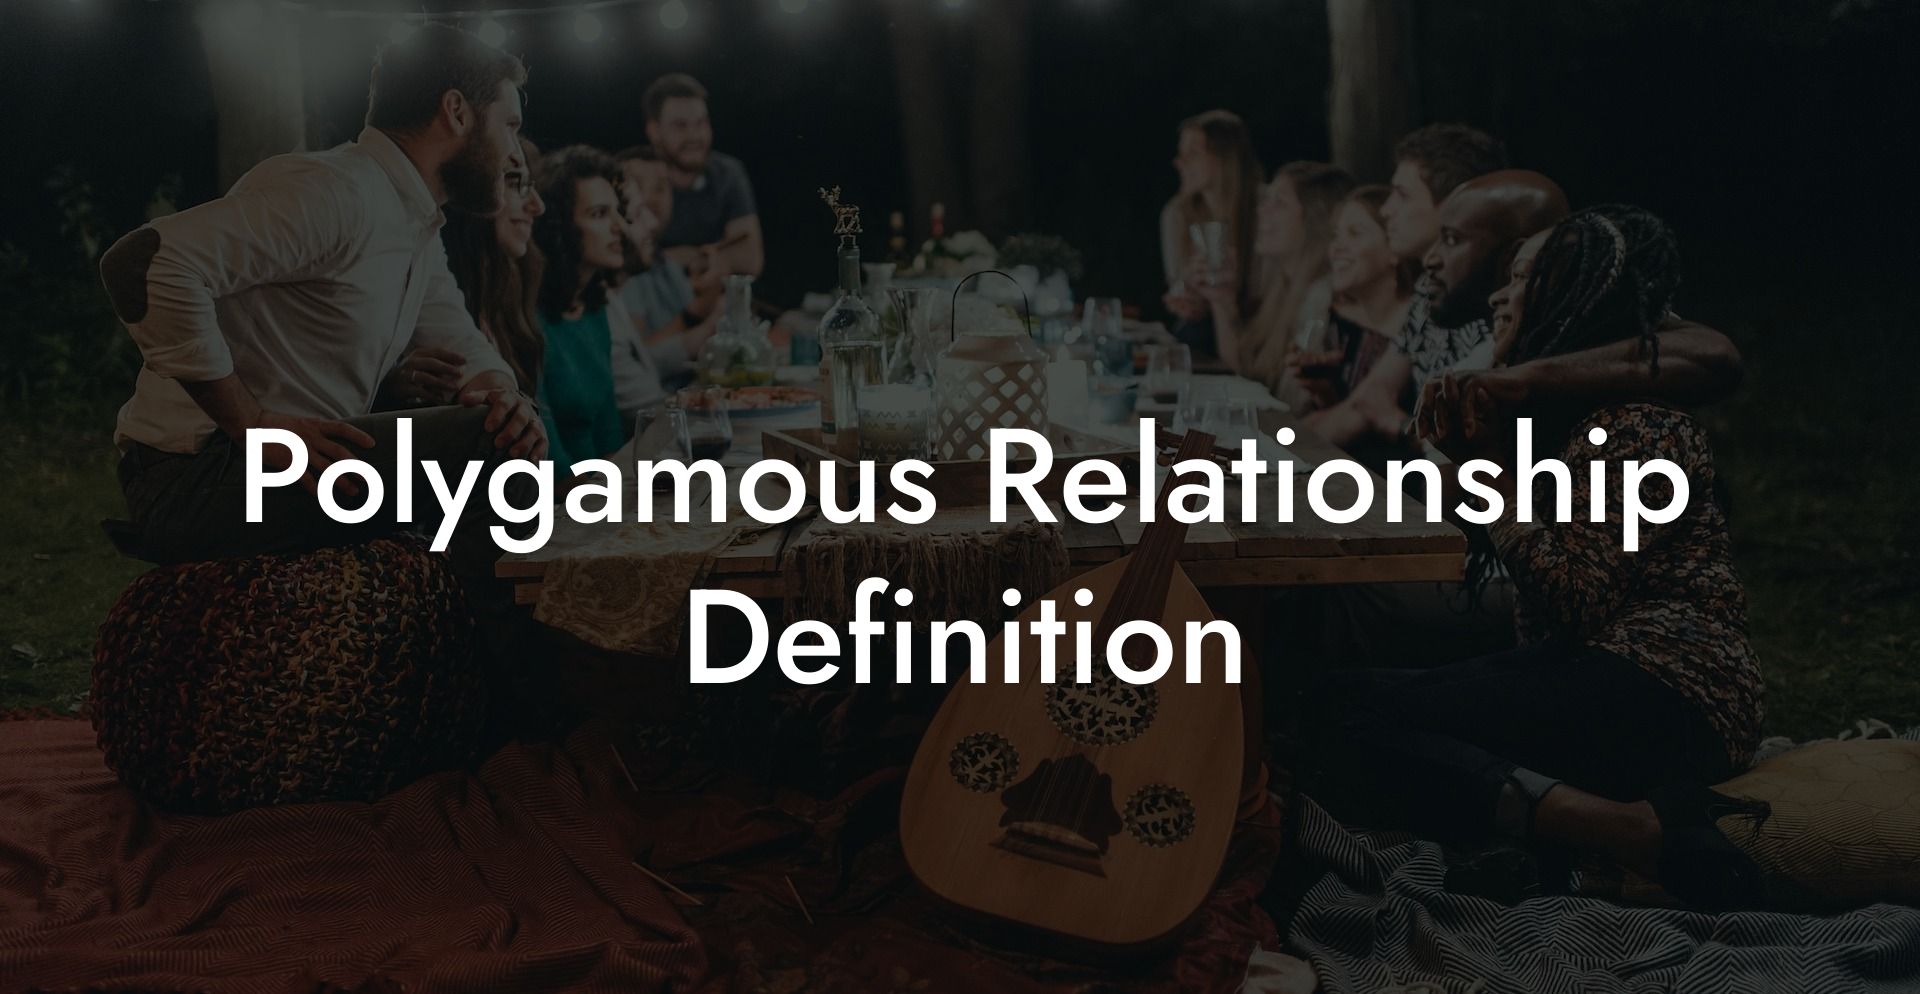 Polygamous Relationship Definition